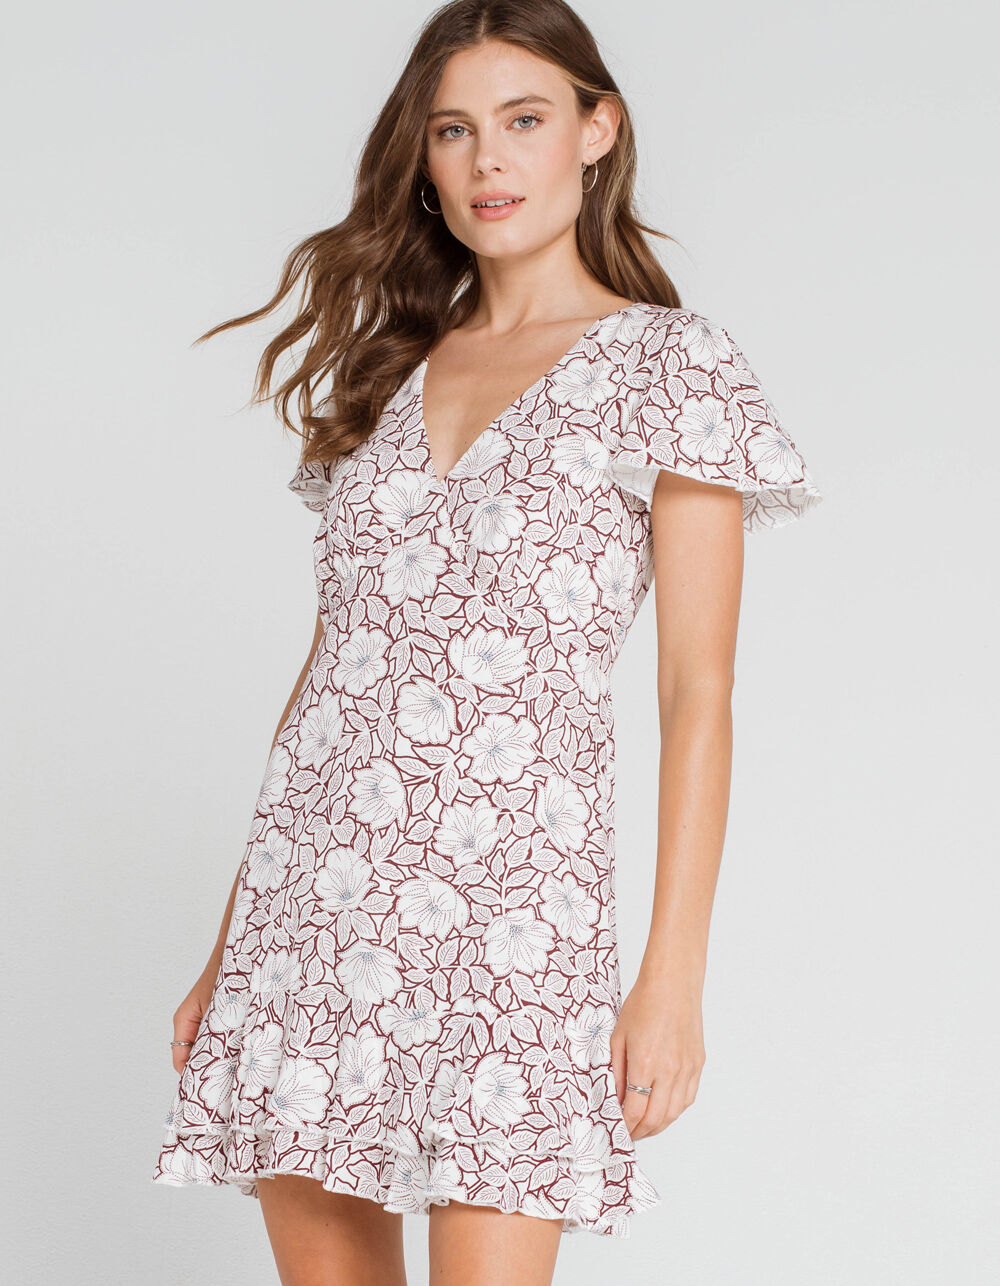 WEST OF MELROSE Out In The Open Back Dress - WHITE COMBO | Tillys